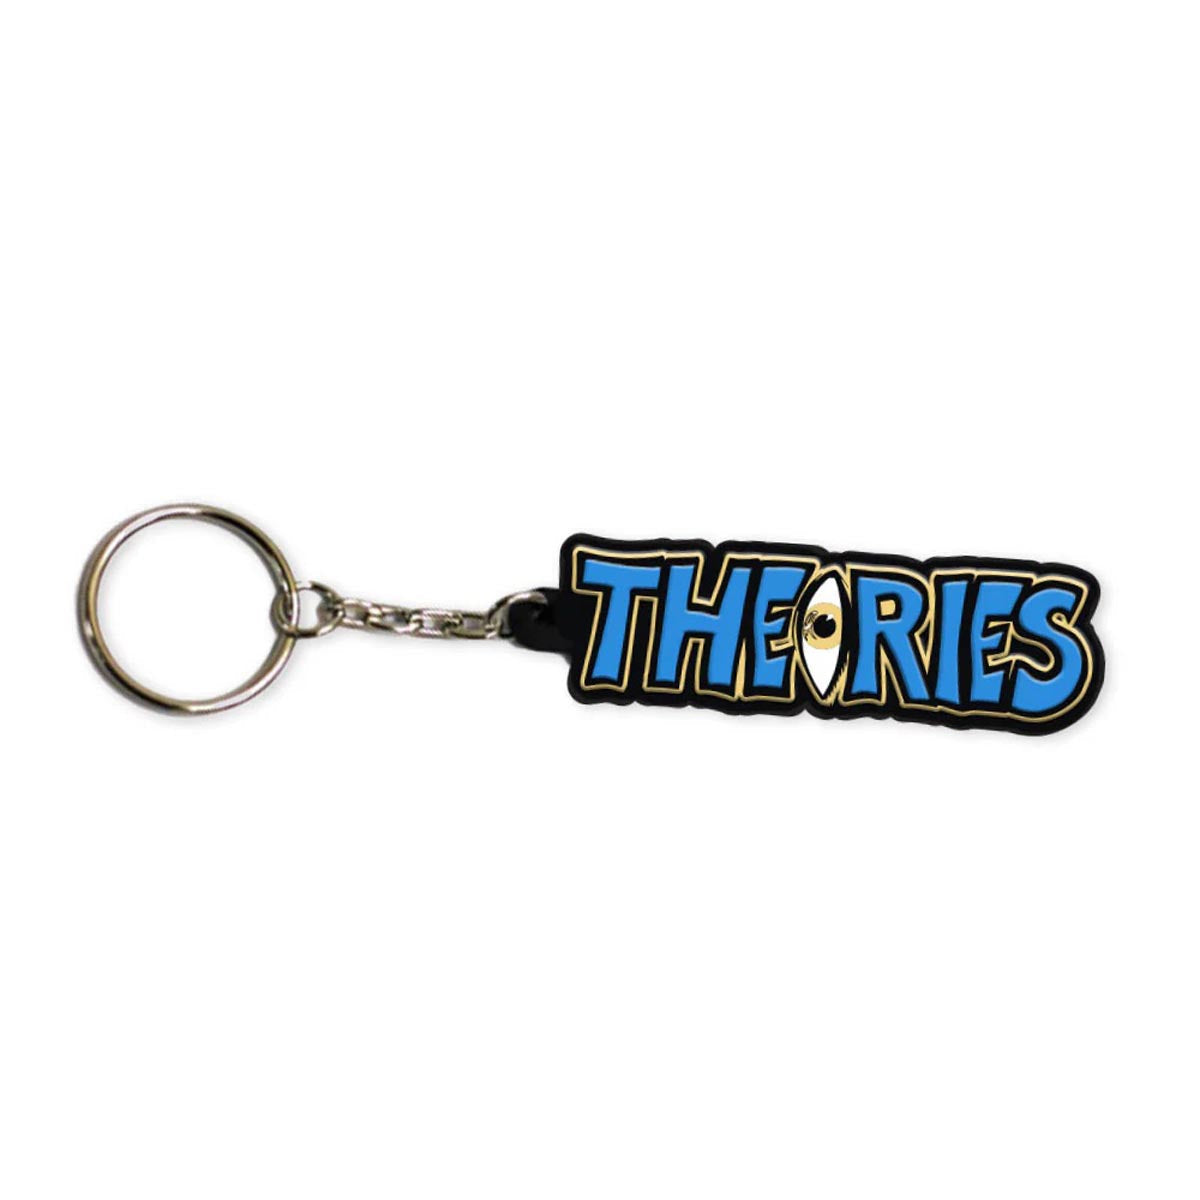 Theories That's Life Rubber Keychain Keychains - Multi image 1